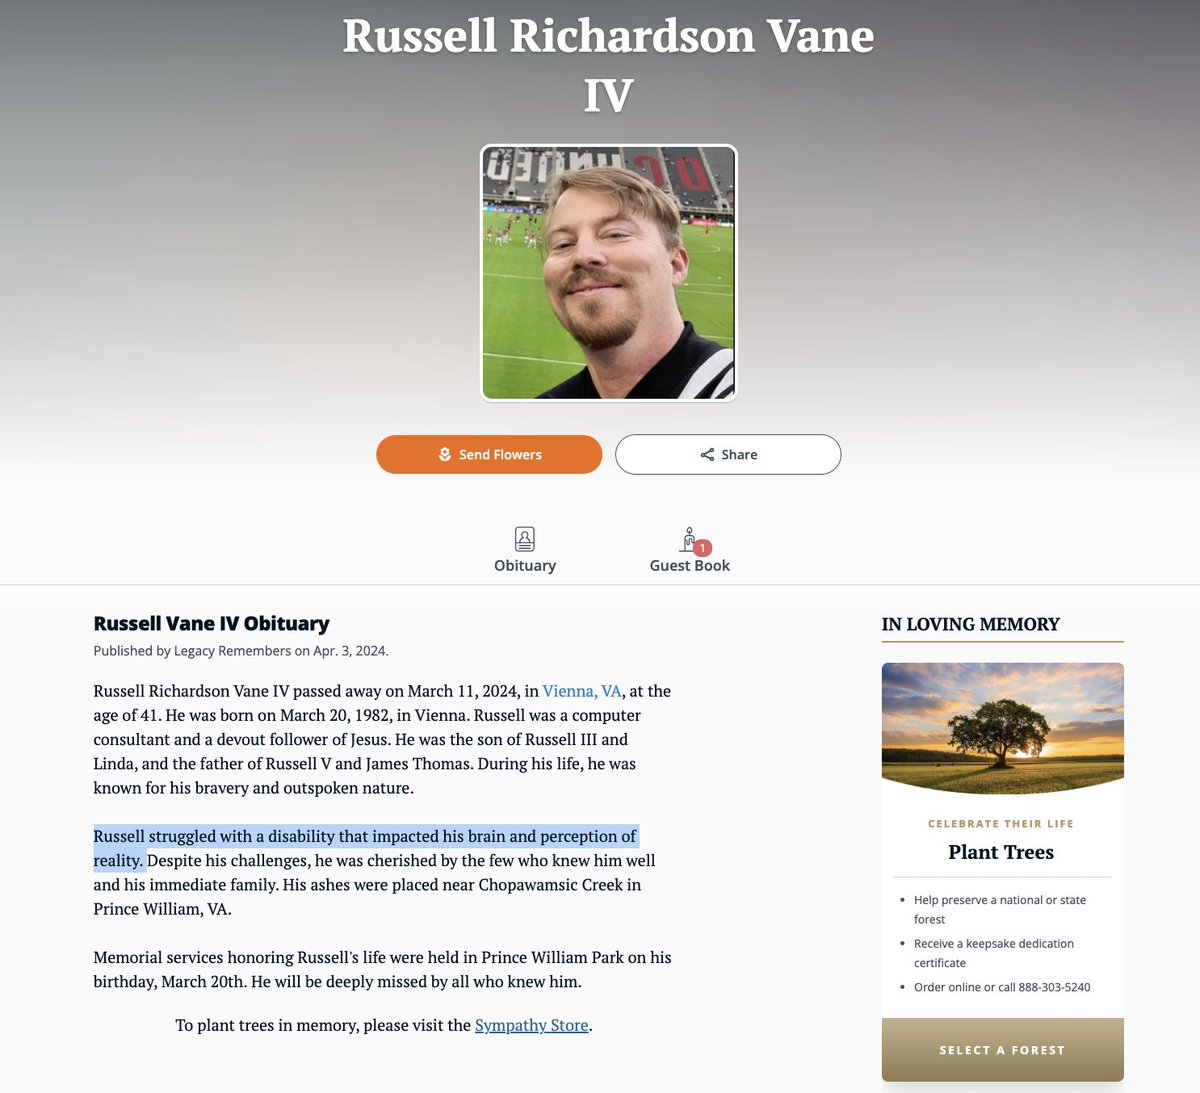 28) While the photo and family information are accurate, 'Russell struggled with a disability that impacted his brain and perception of reality' is a bizarre line to include in an obituary, paired with no mention of his military service, which I've confirmed in court records.